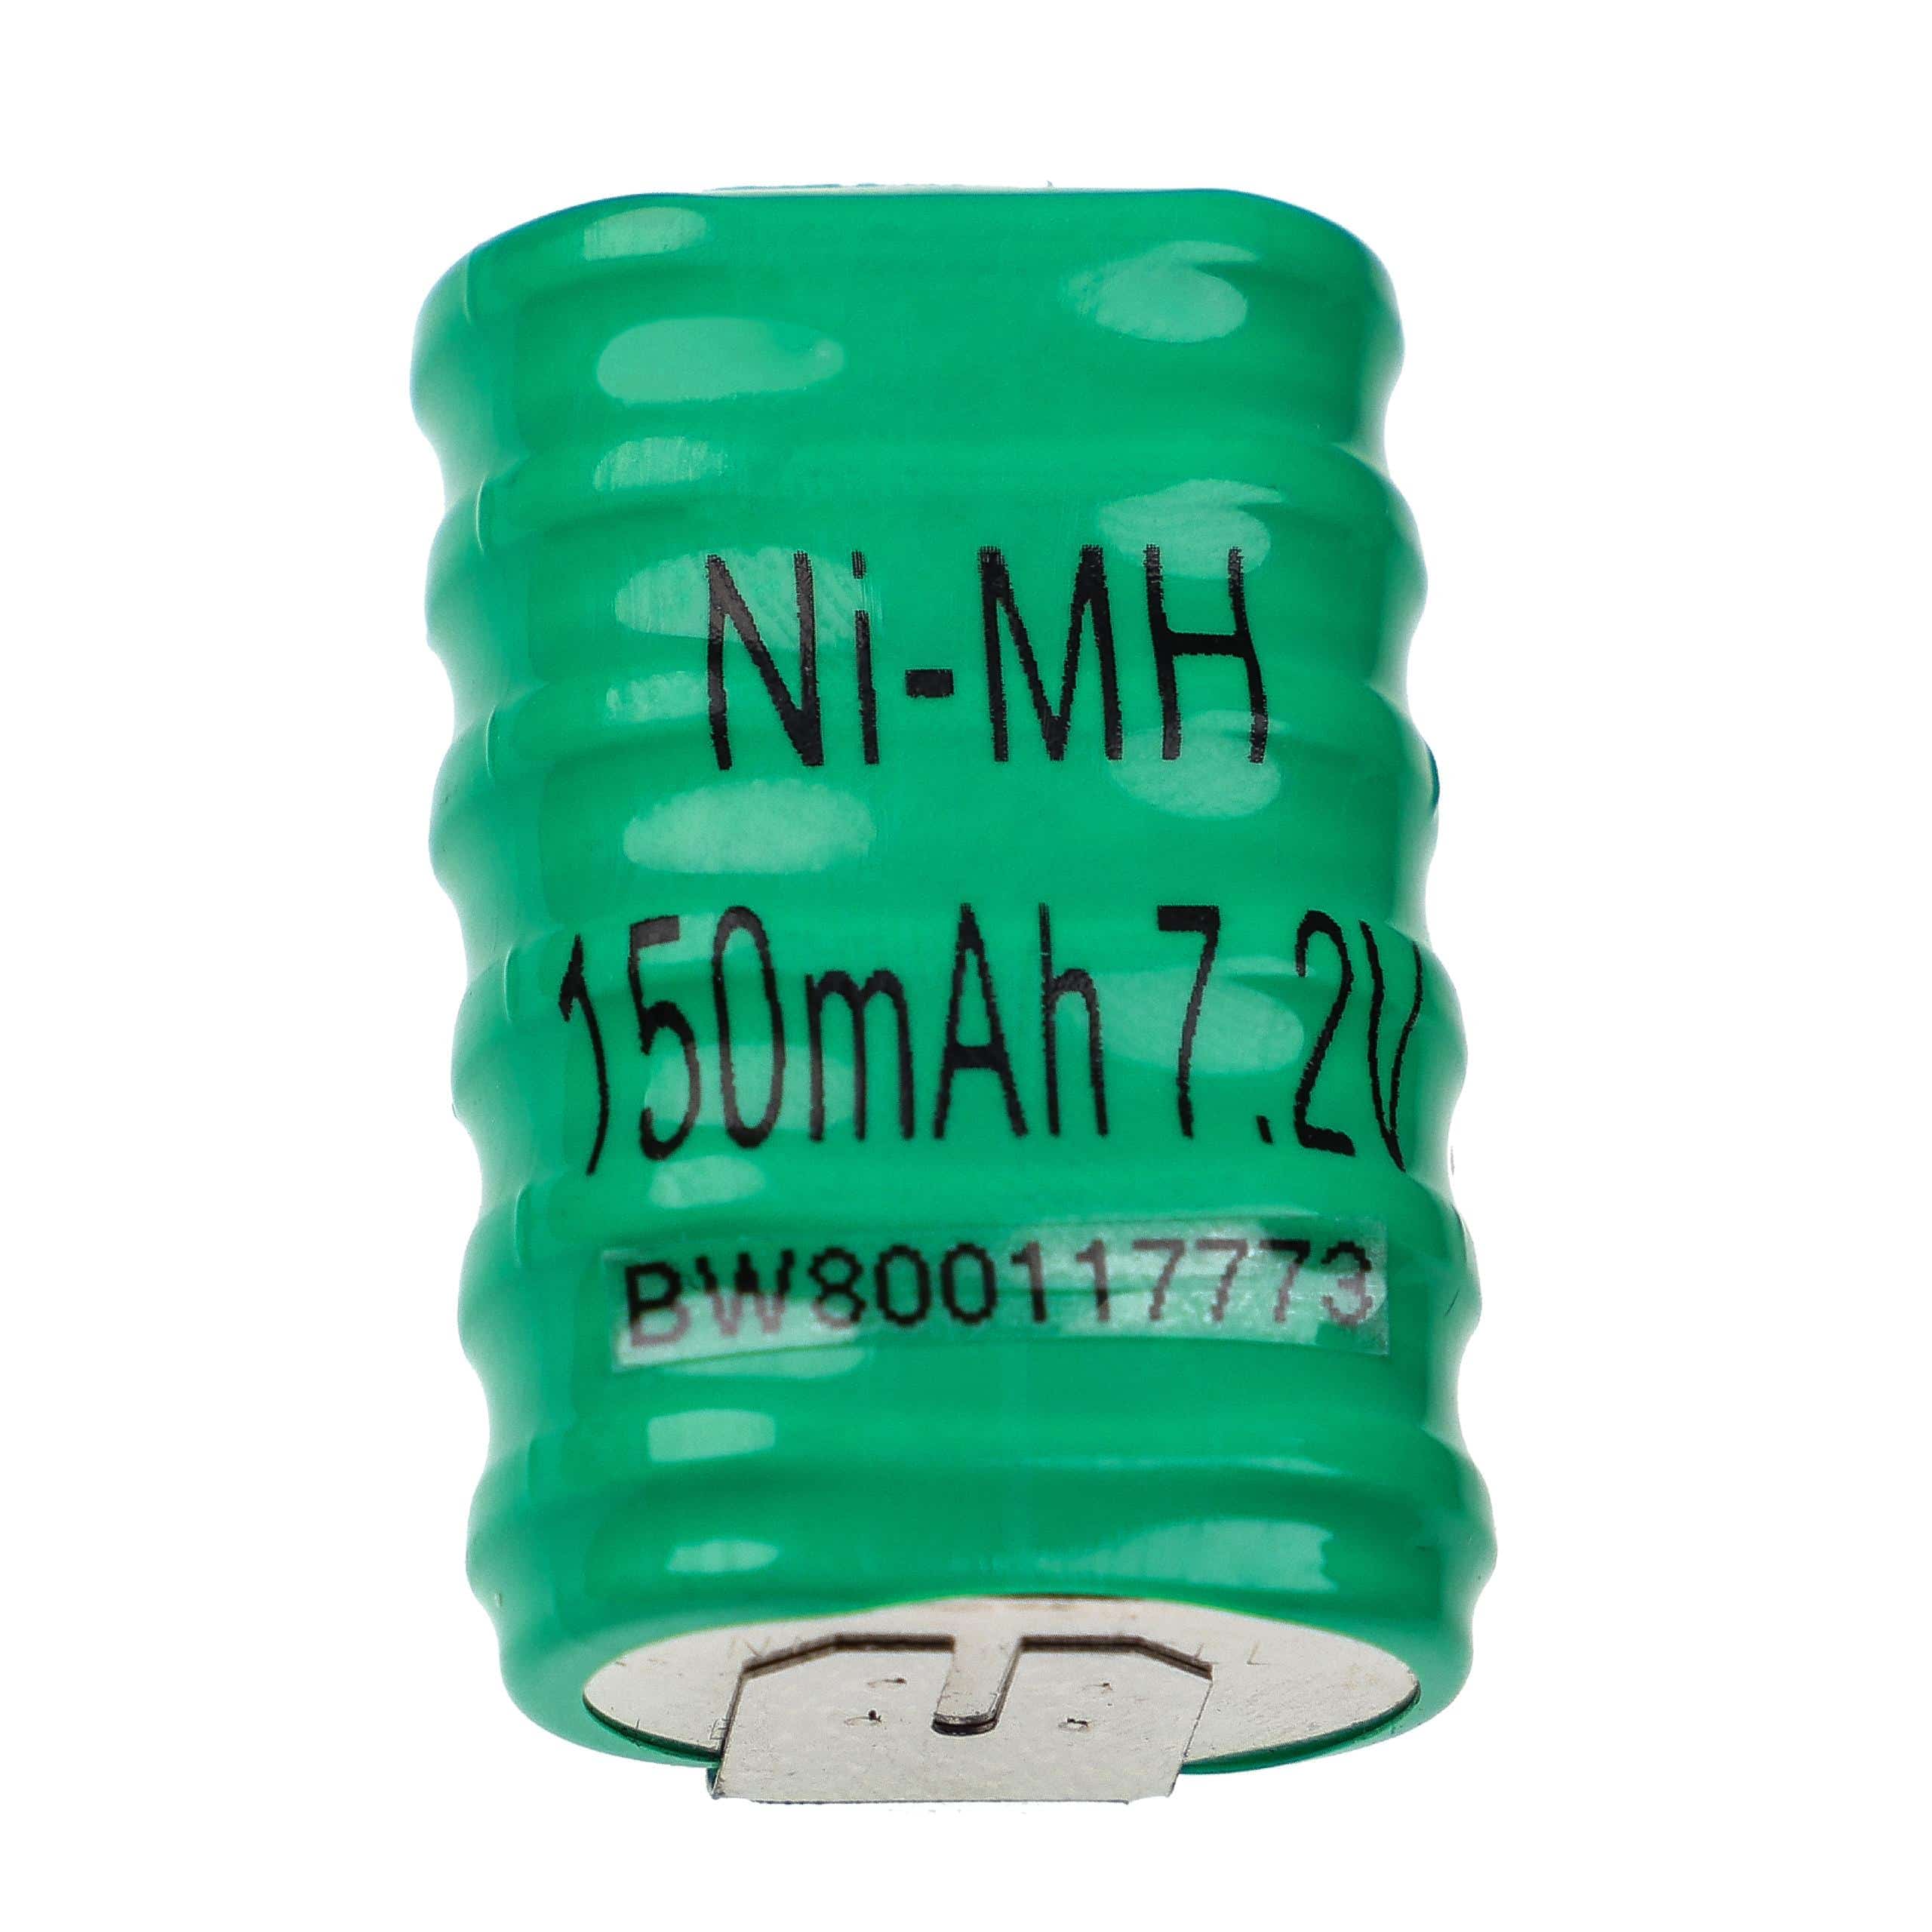 Button Cell Battery (6x Cell) Type 6/V150H 3 Pins for Model Building Solar Lamps etc. - 150mAh 7.2V NiMH